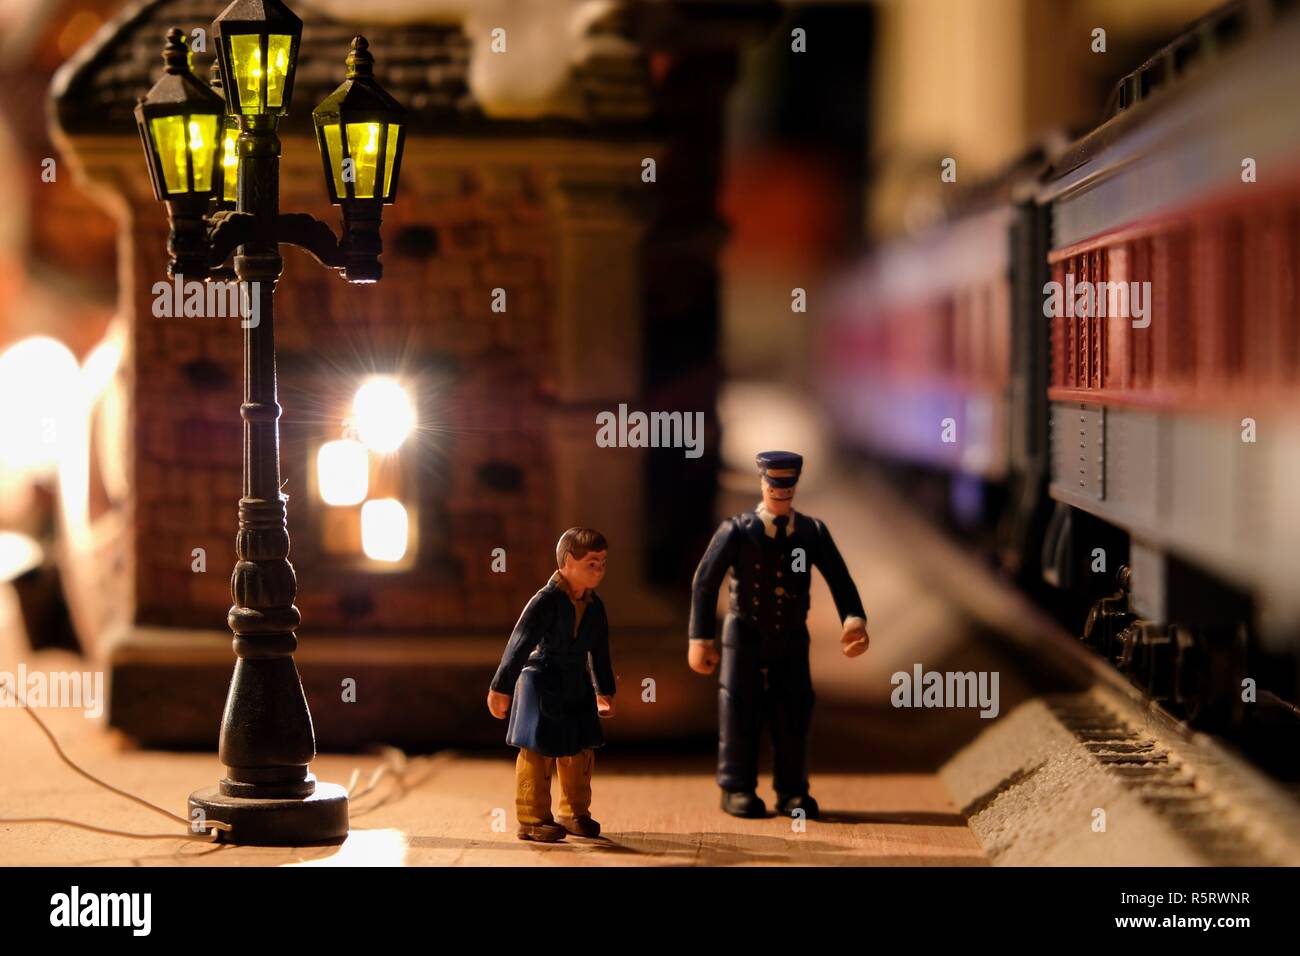 LAFAYETTE, ALABAMA - NOVEMBER 23, 2018: The little boy and the conductor from the Polar Express story as little figurines as part of a toy electric tr Stock Photo